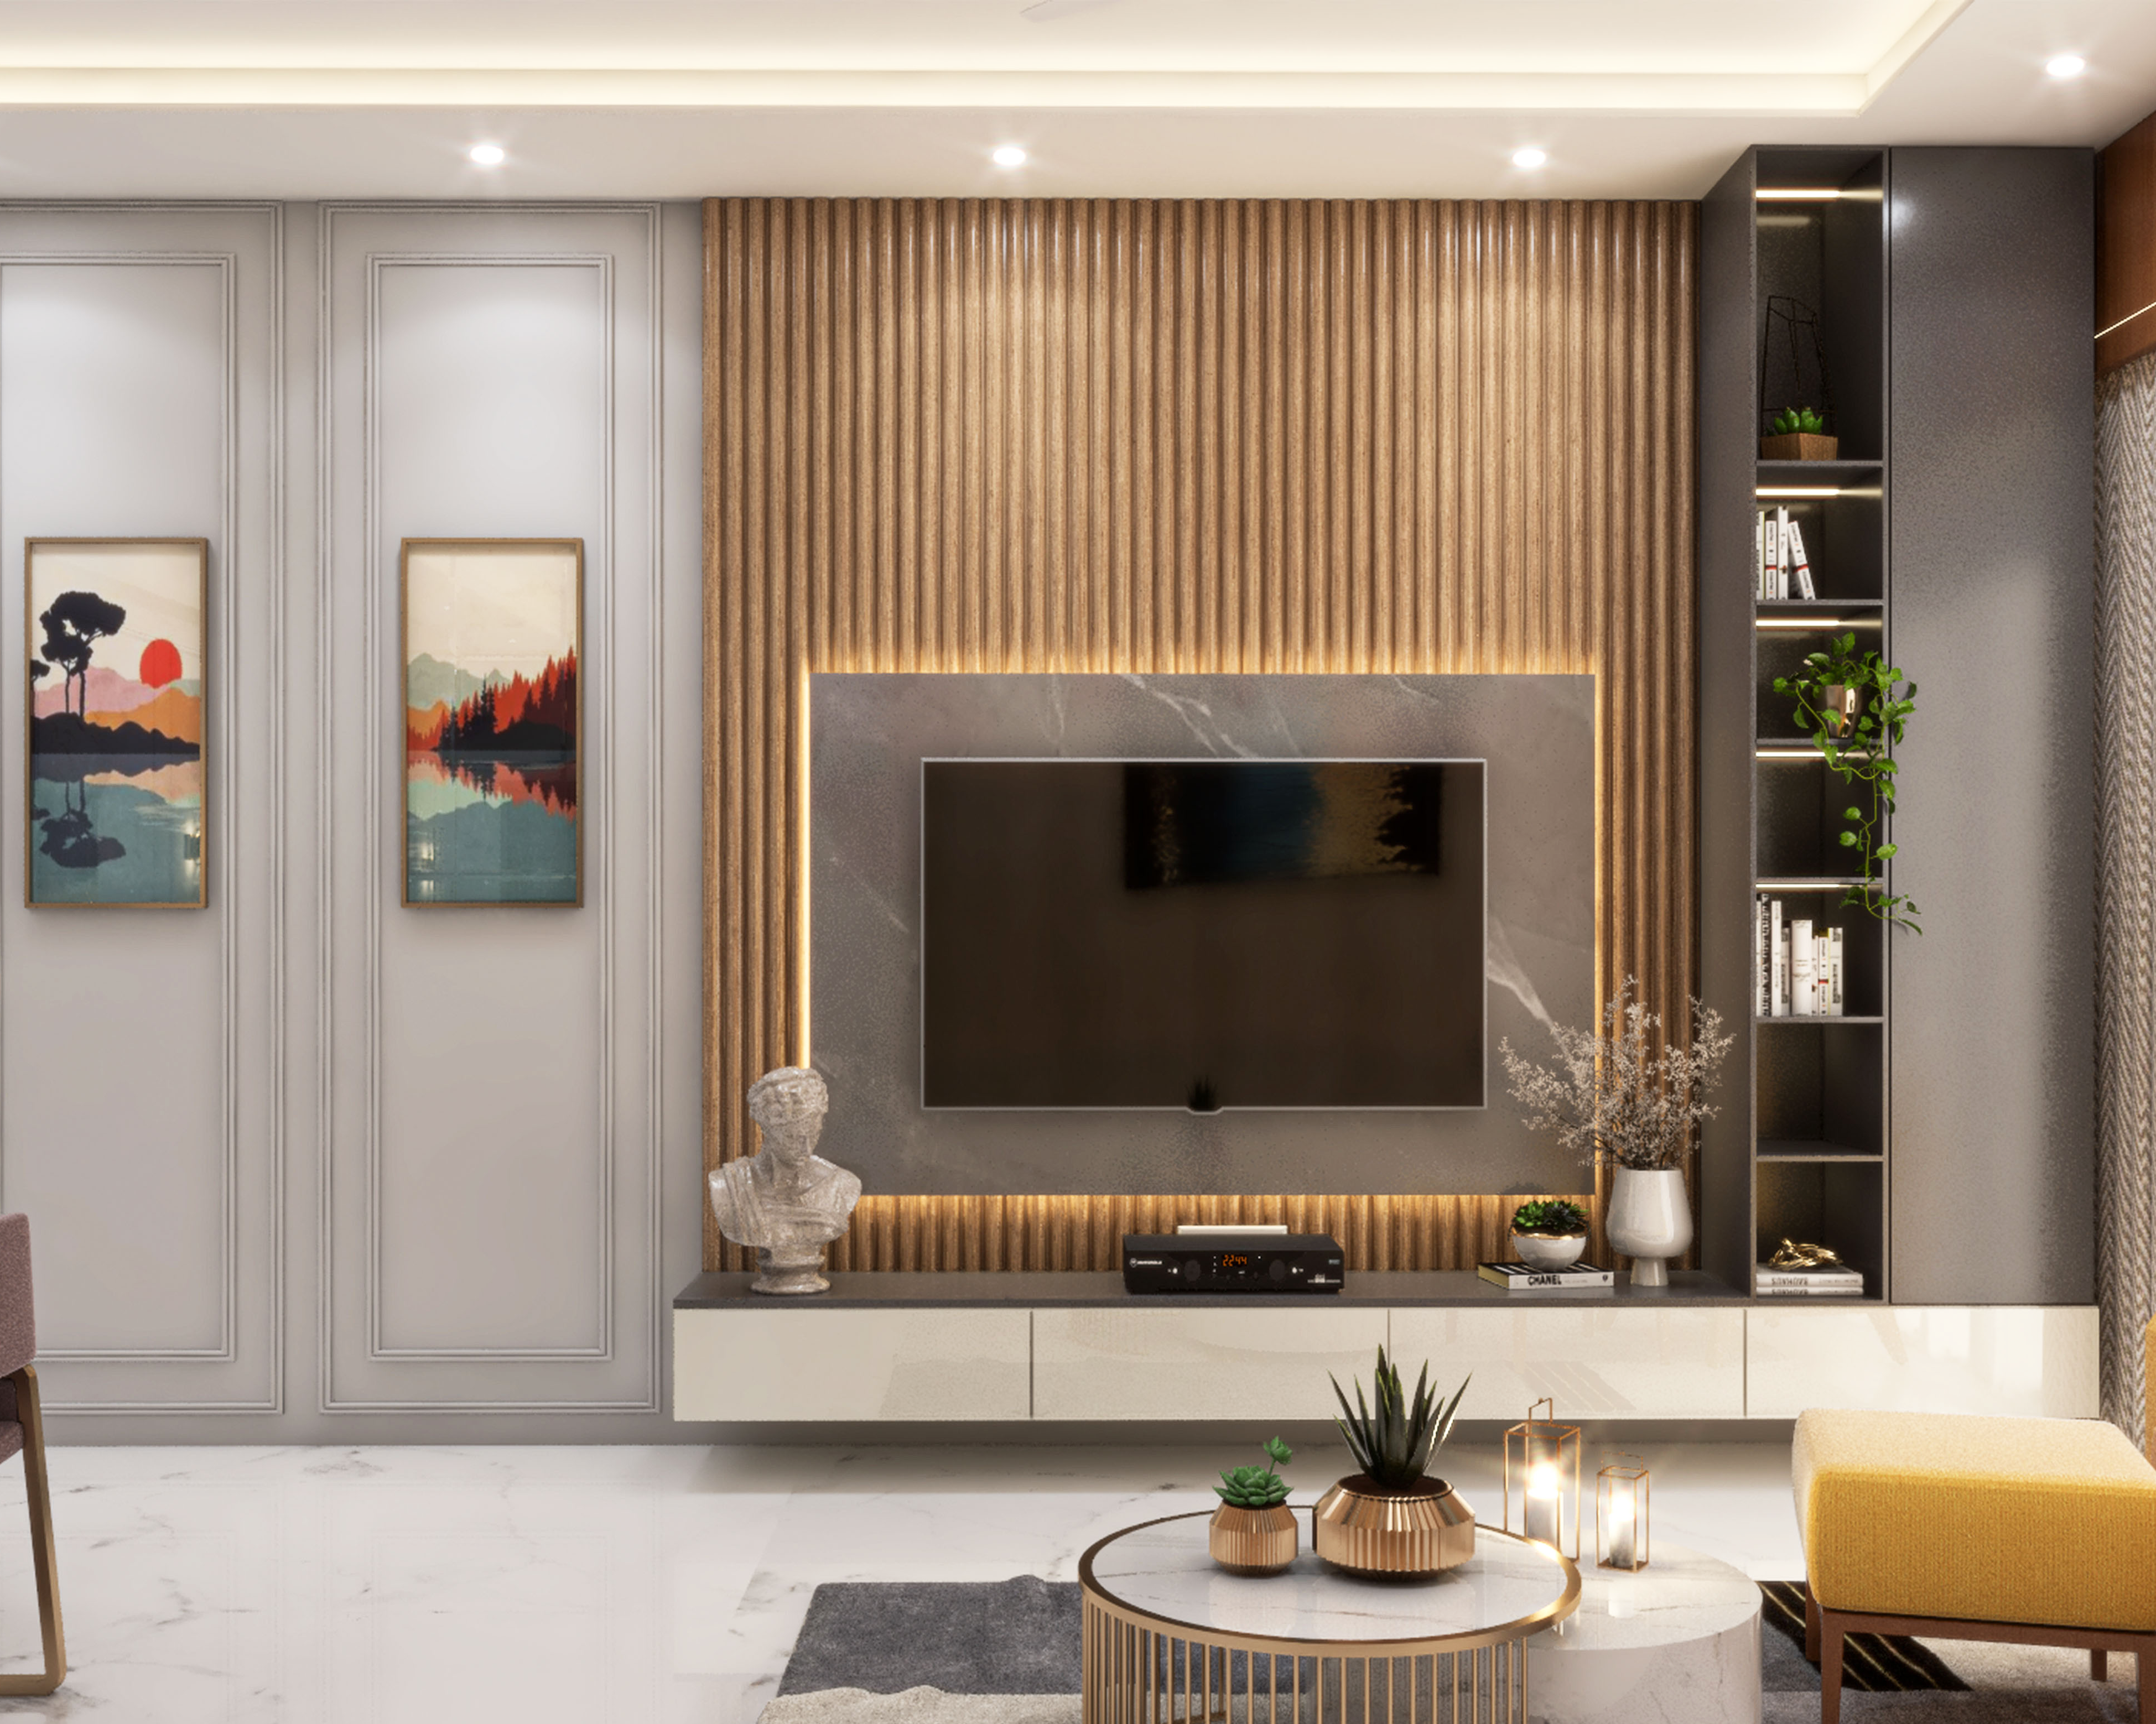 Modern TV Unit Design With Wooden Panels